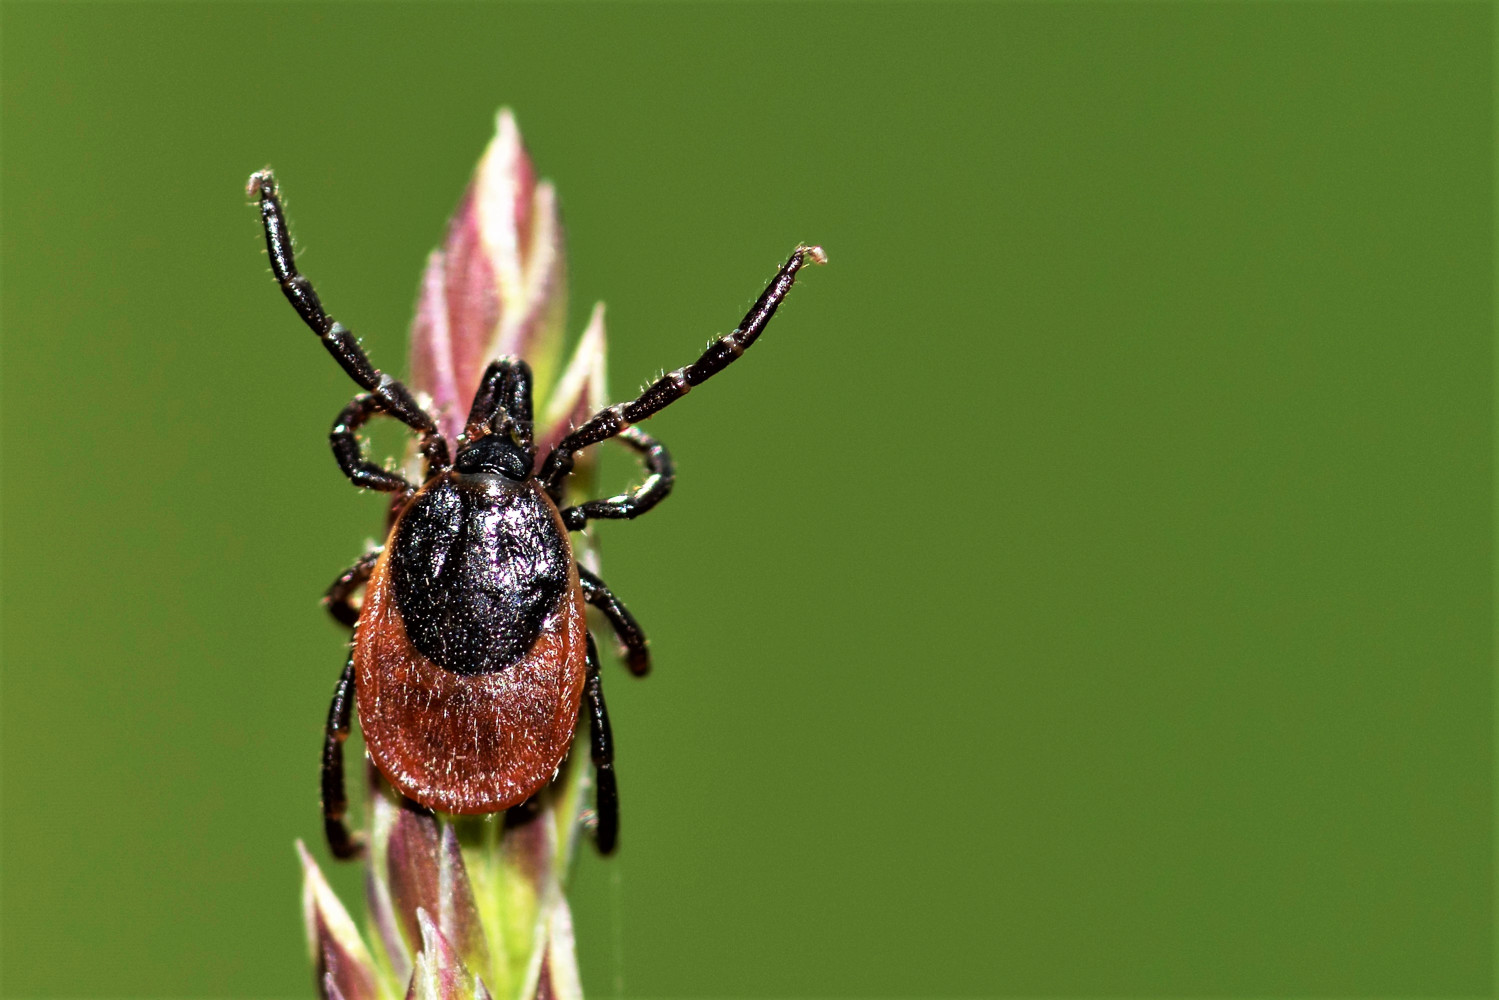 Warming climate pushes vectors farther north, increasing risk of Lyme disease in Canada